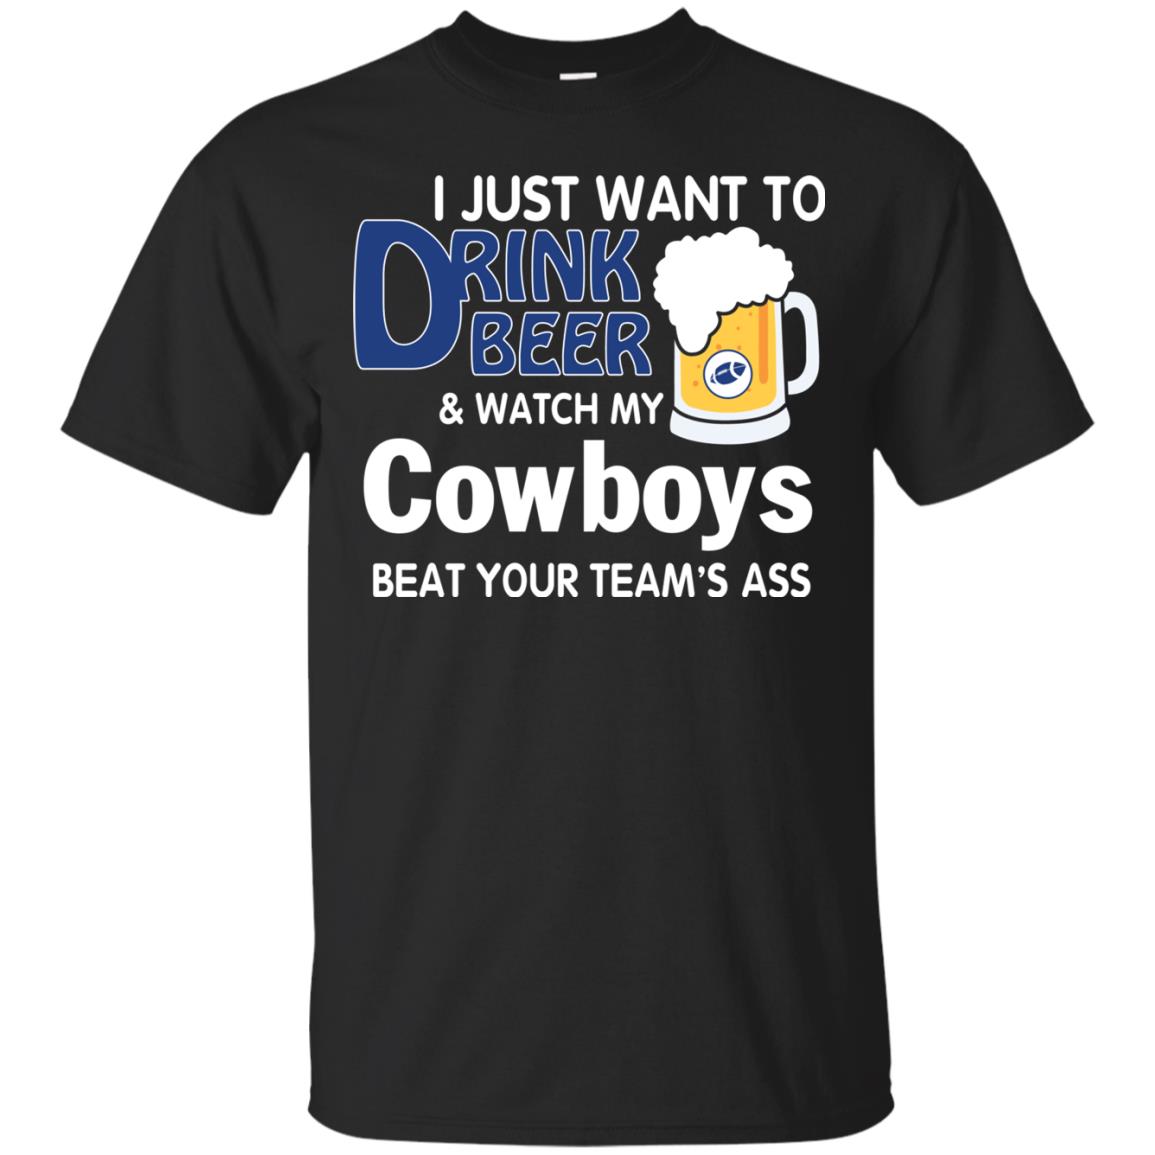 I just want to drink beer and watch my Cowboys beat your team's ass t shirt